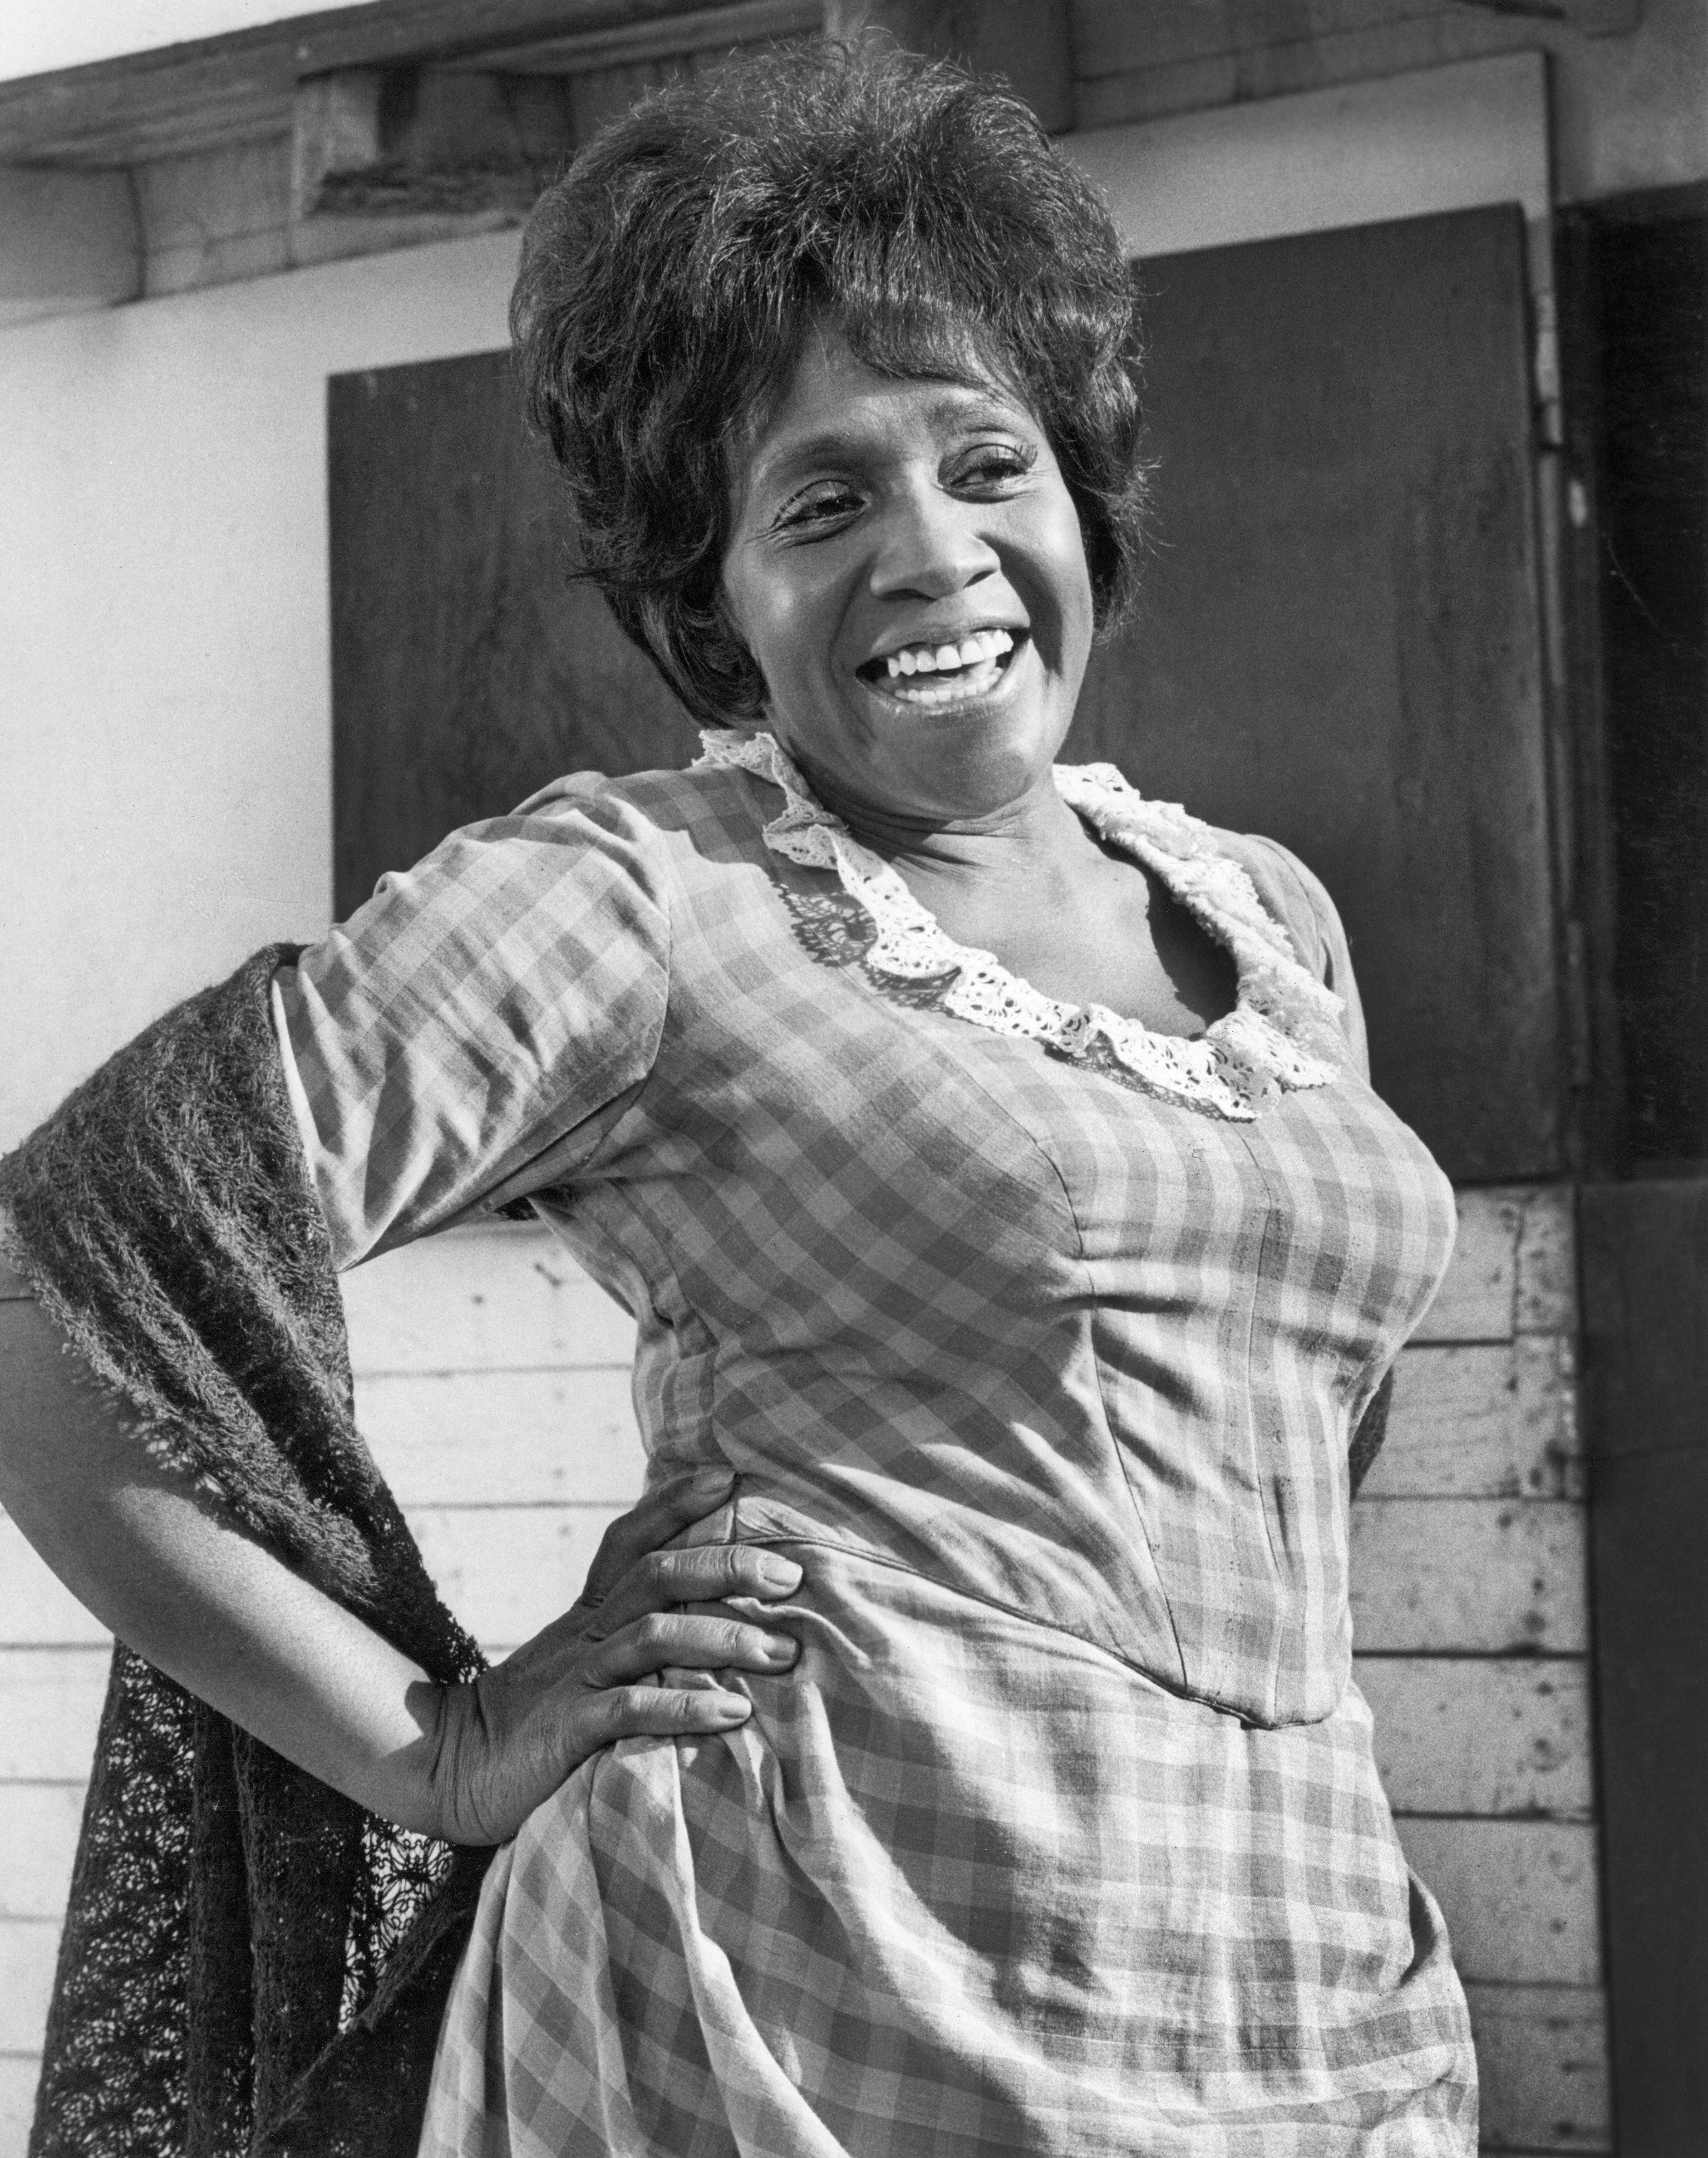 Isabel Sanford posing in a publicity portrait for the film, "Soul Soldier" in 1970 | Source: Getty Images